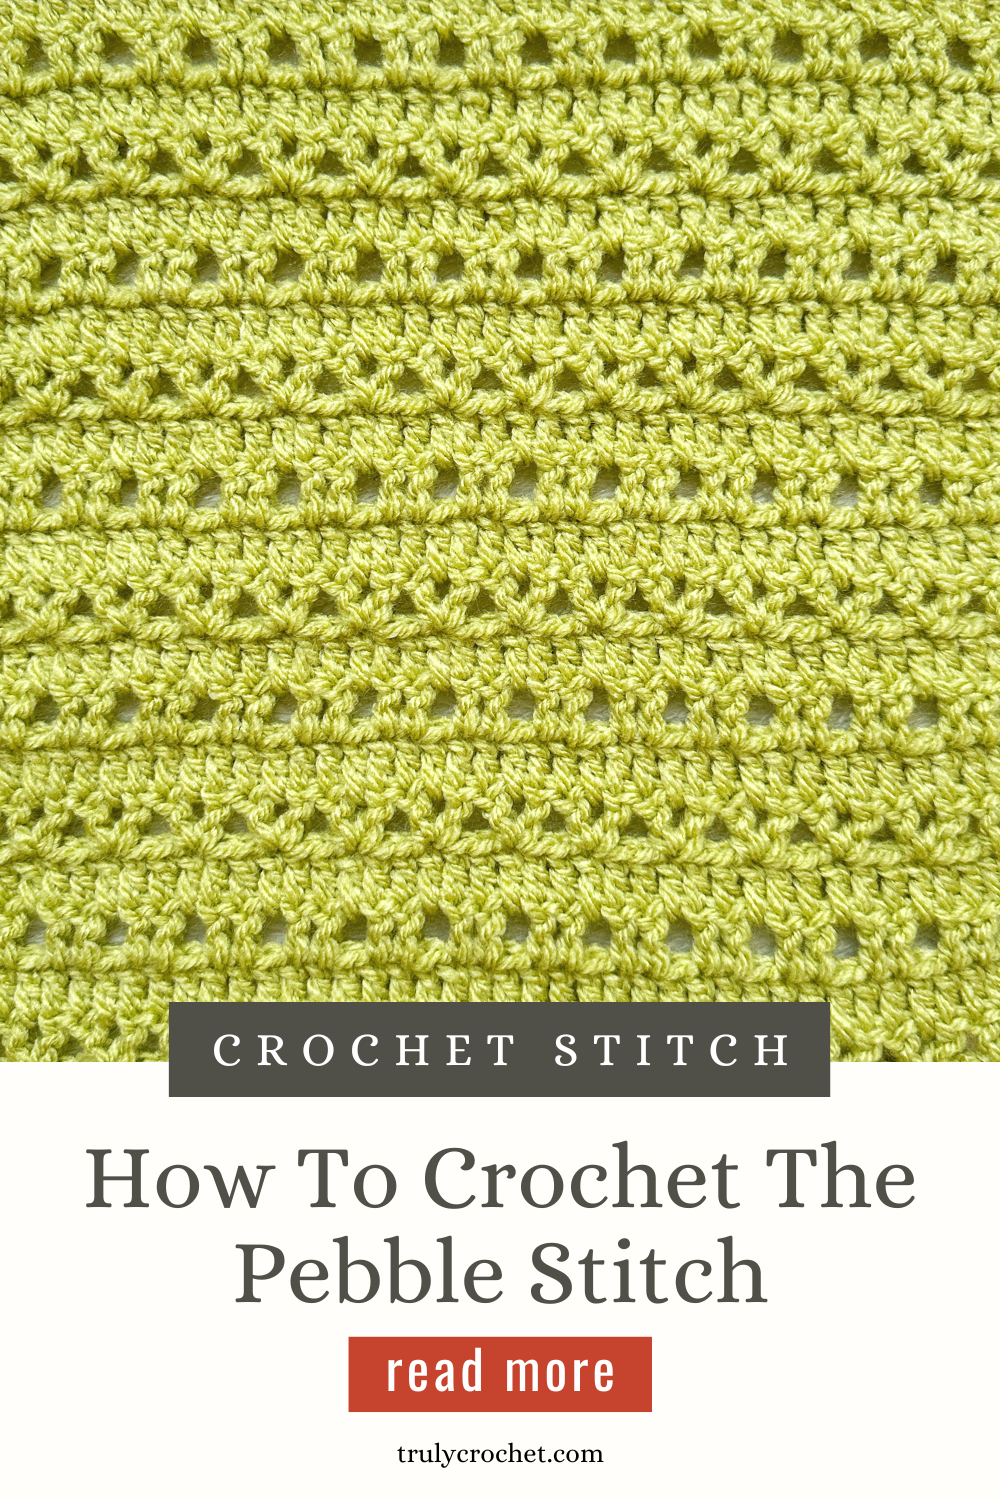 How To Crochet The Pebble Stitch